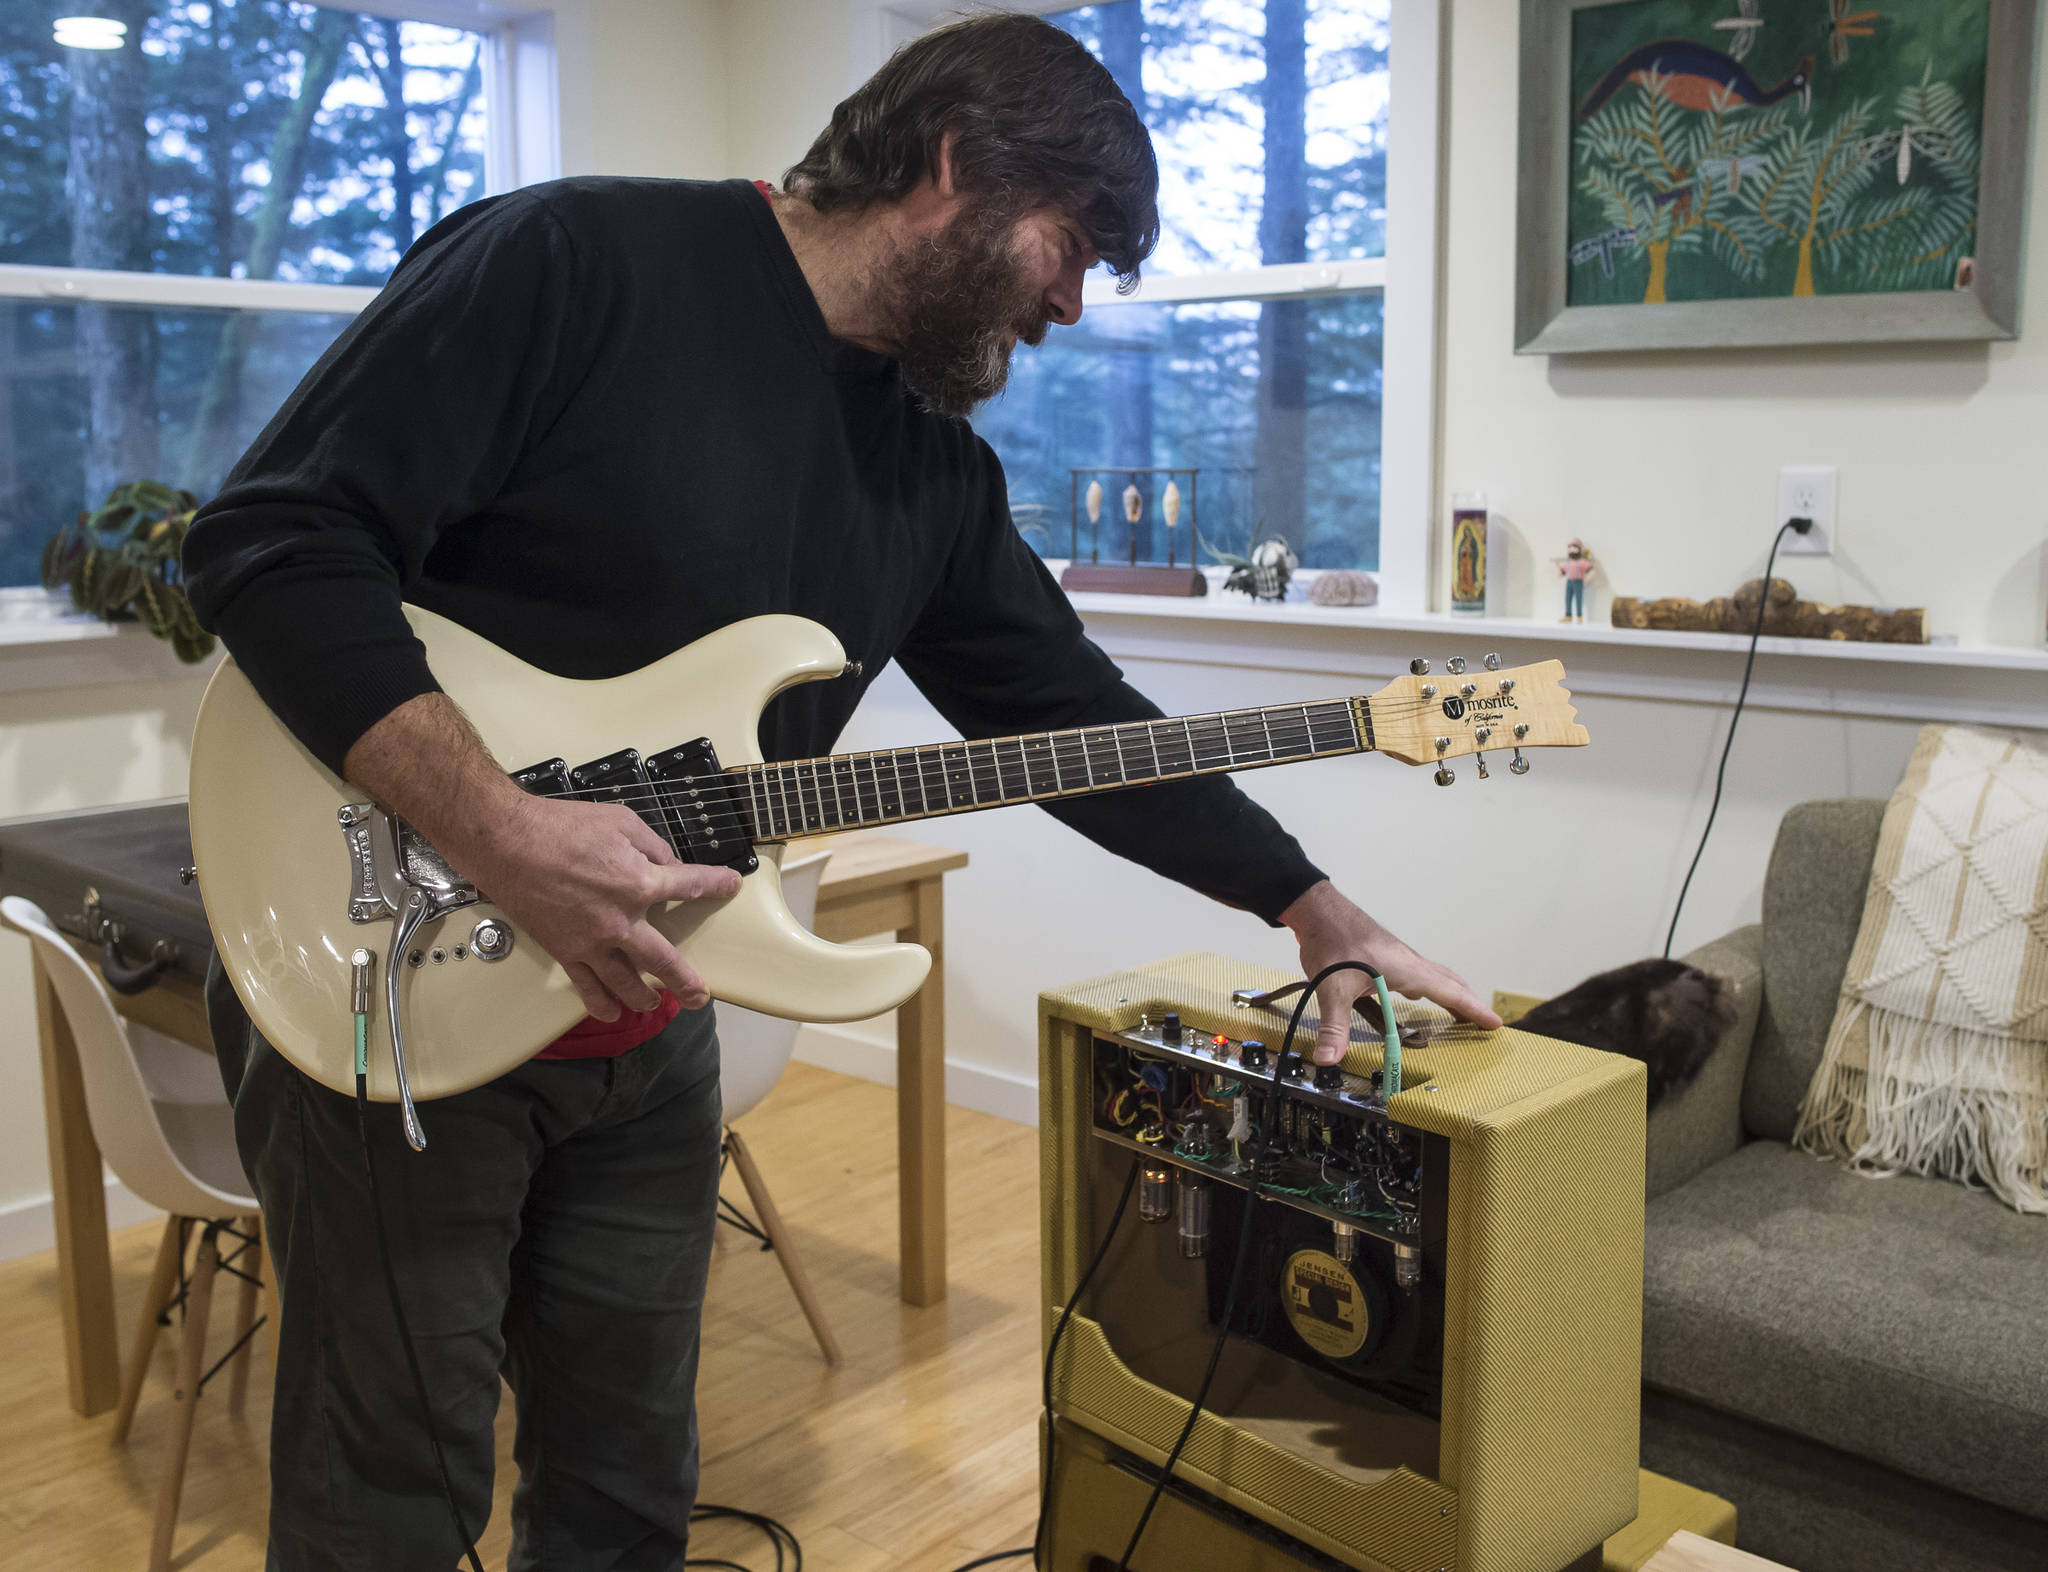 Reber Stein talks Wednesday, Dec. 5, 2018, about making tube amplifiers for his friends. Stein has been tinkering with the guitar amplifiers that make use of vacuum tubes for about a decade. While Stein uses guitars to test his amps, he said learning to play remains a goal. (Michael Penn | Juneau Empire)